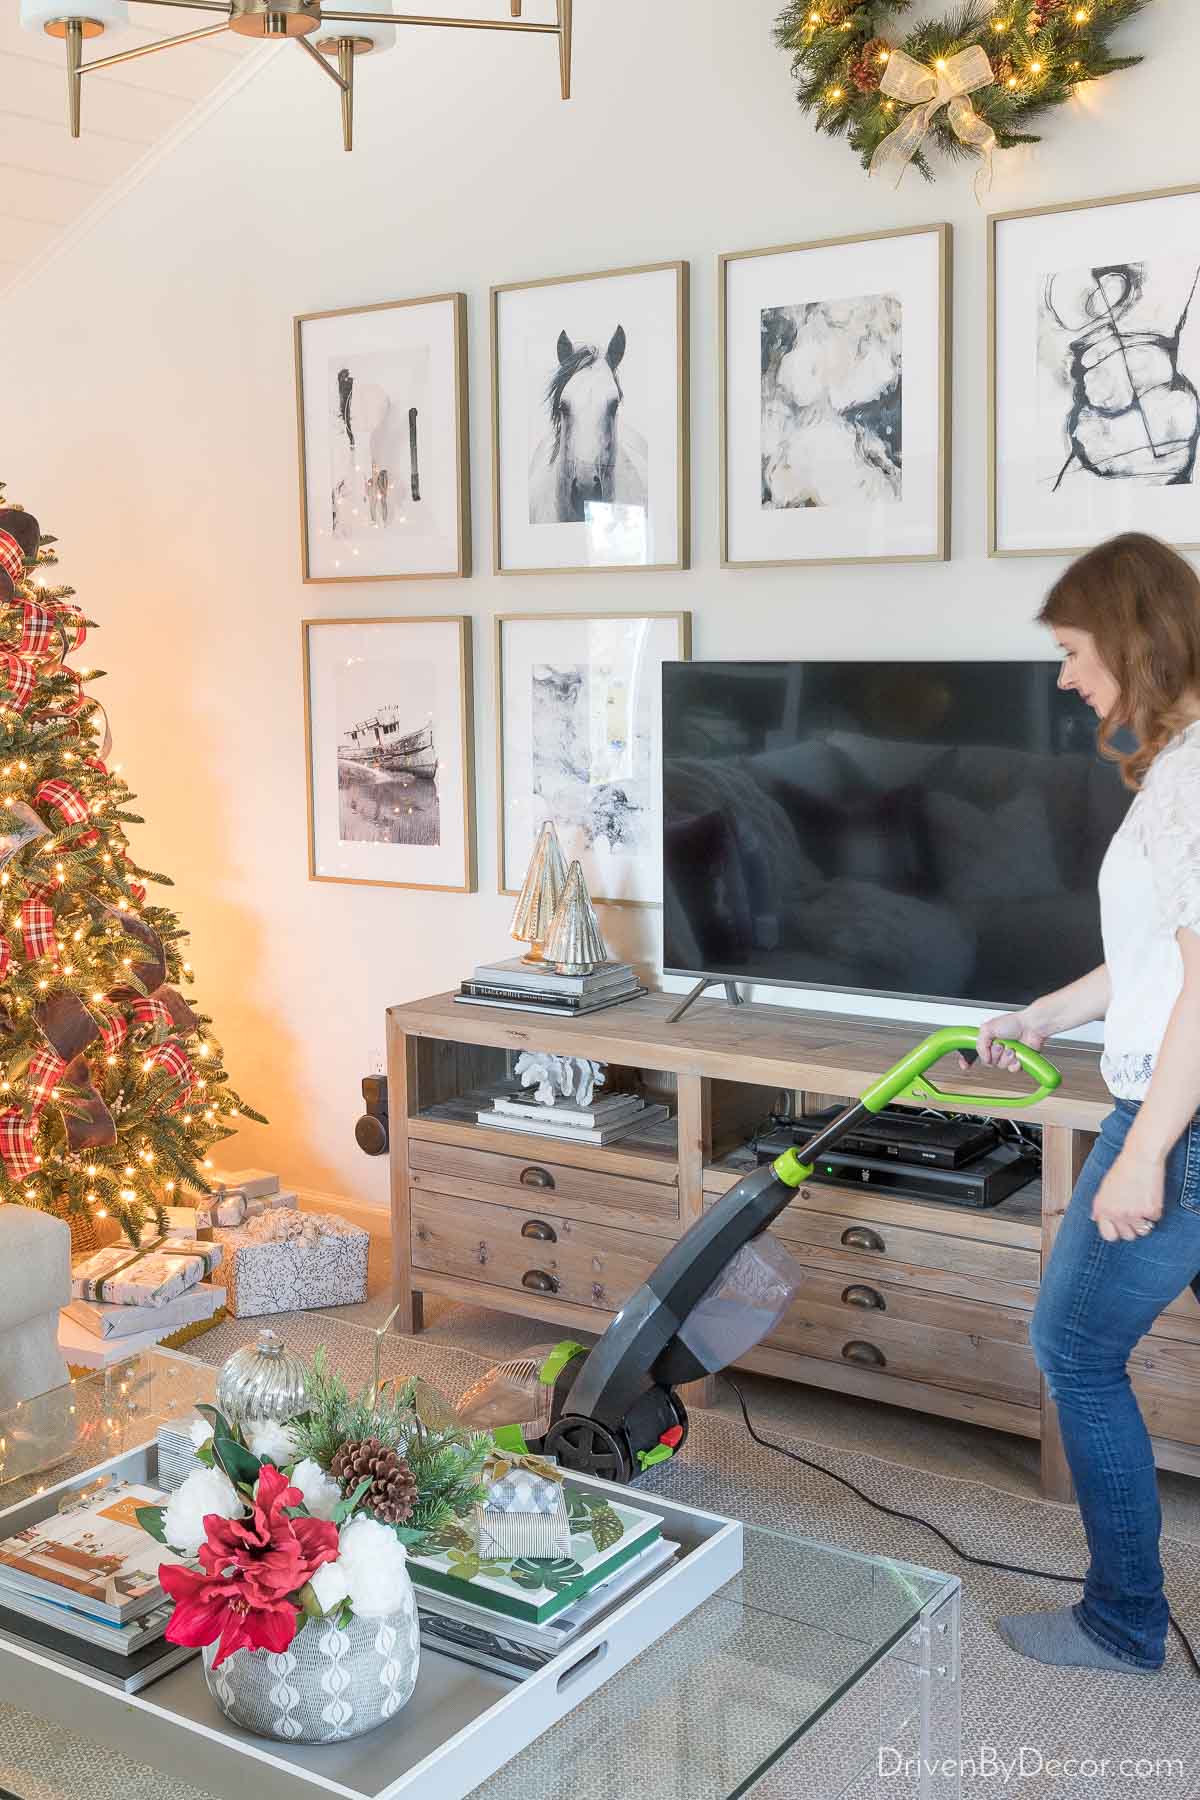 This upright carpet cleaner is one of my favorite cleaning tools!